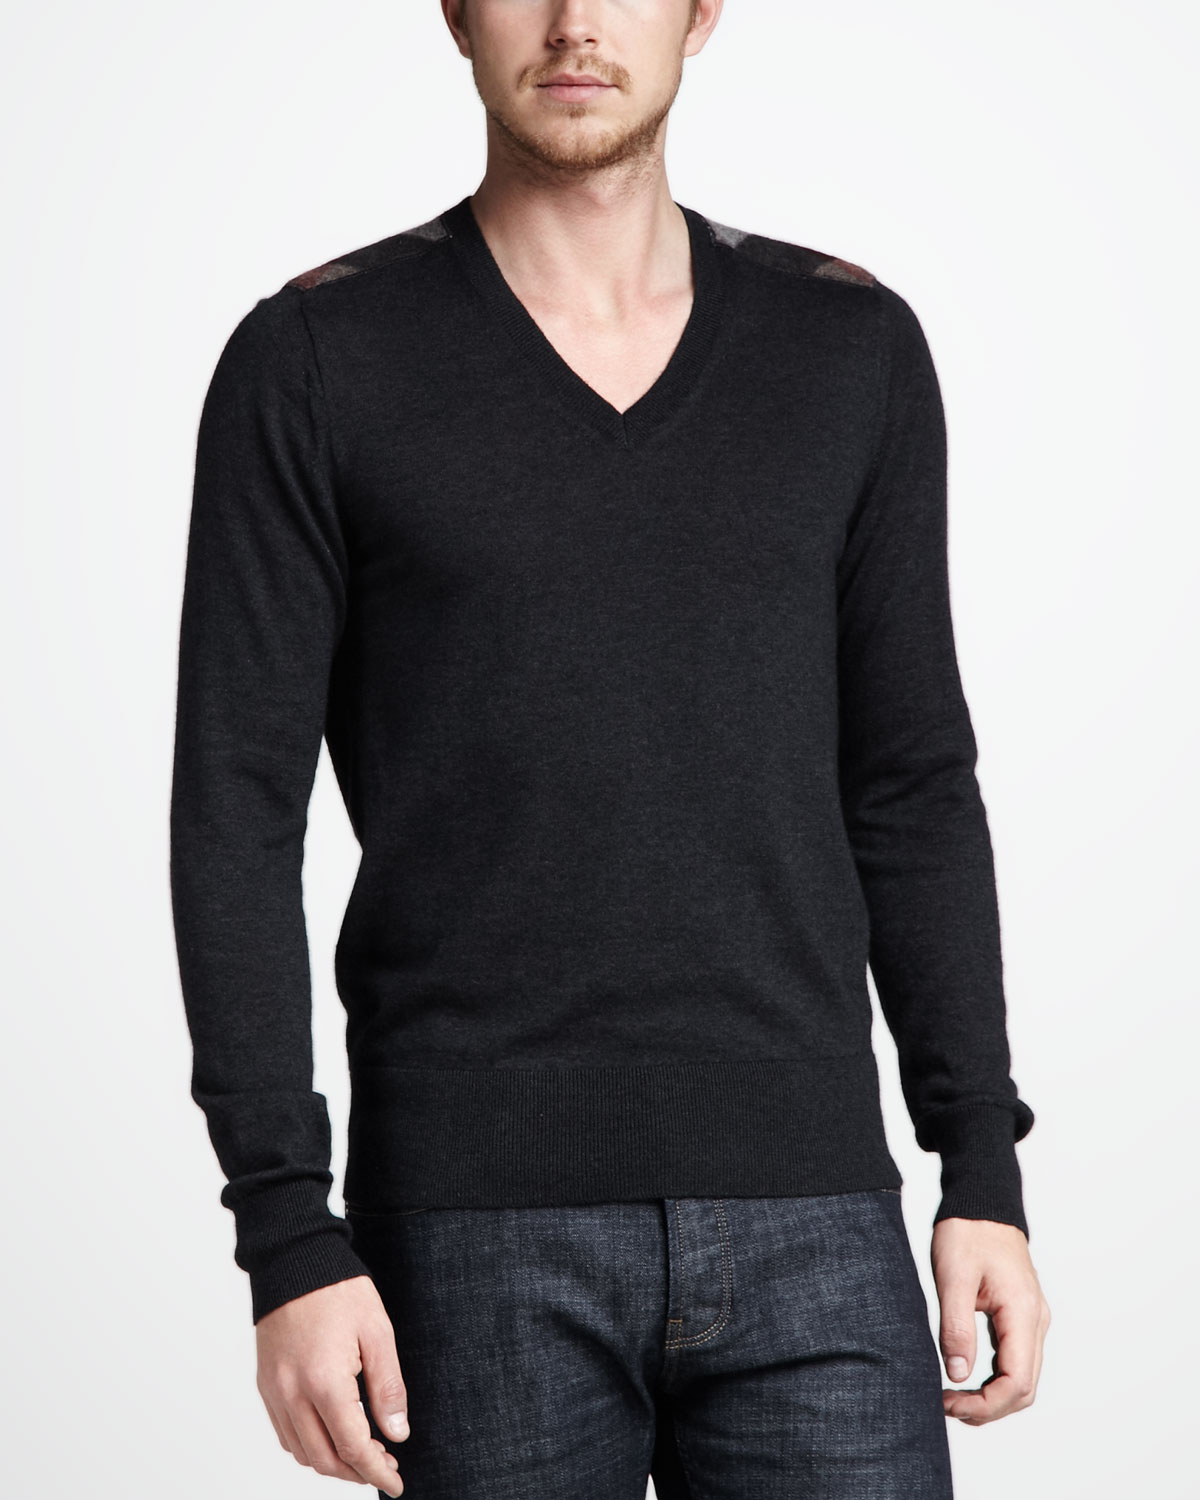 Lyst - Burberry Brit Cashmerecotton Sweater in Black for Men